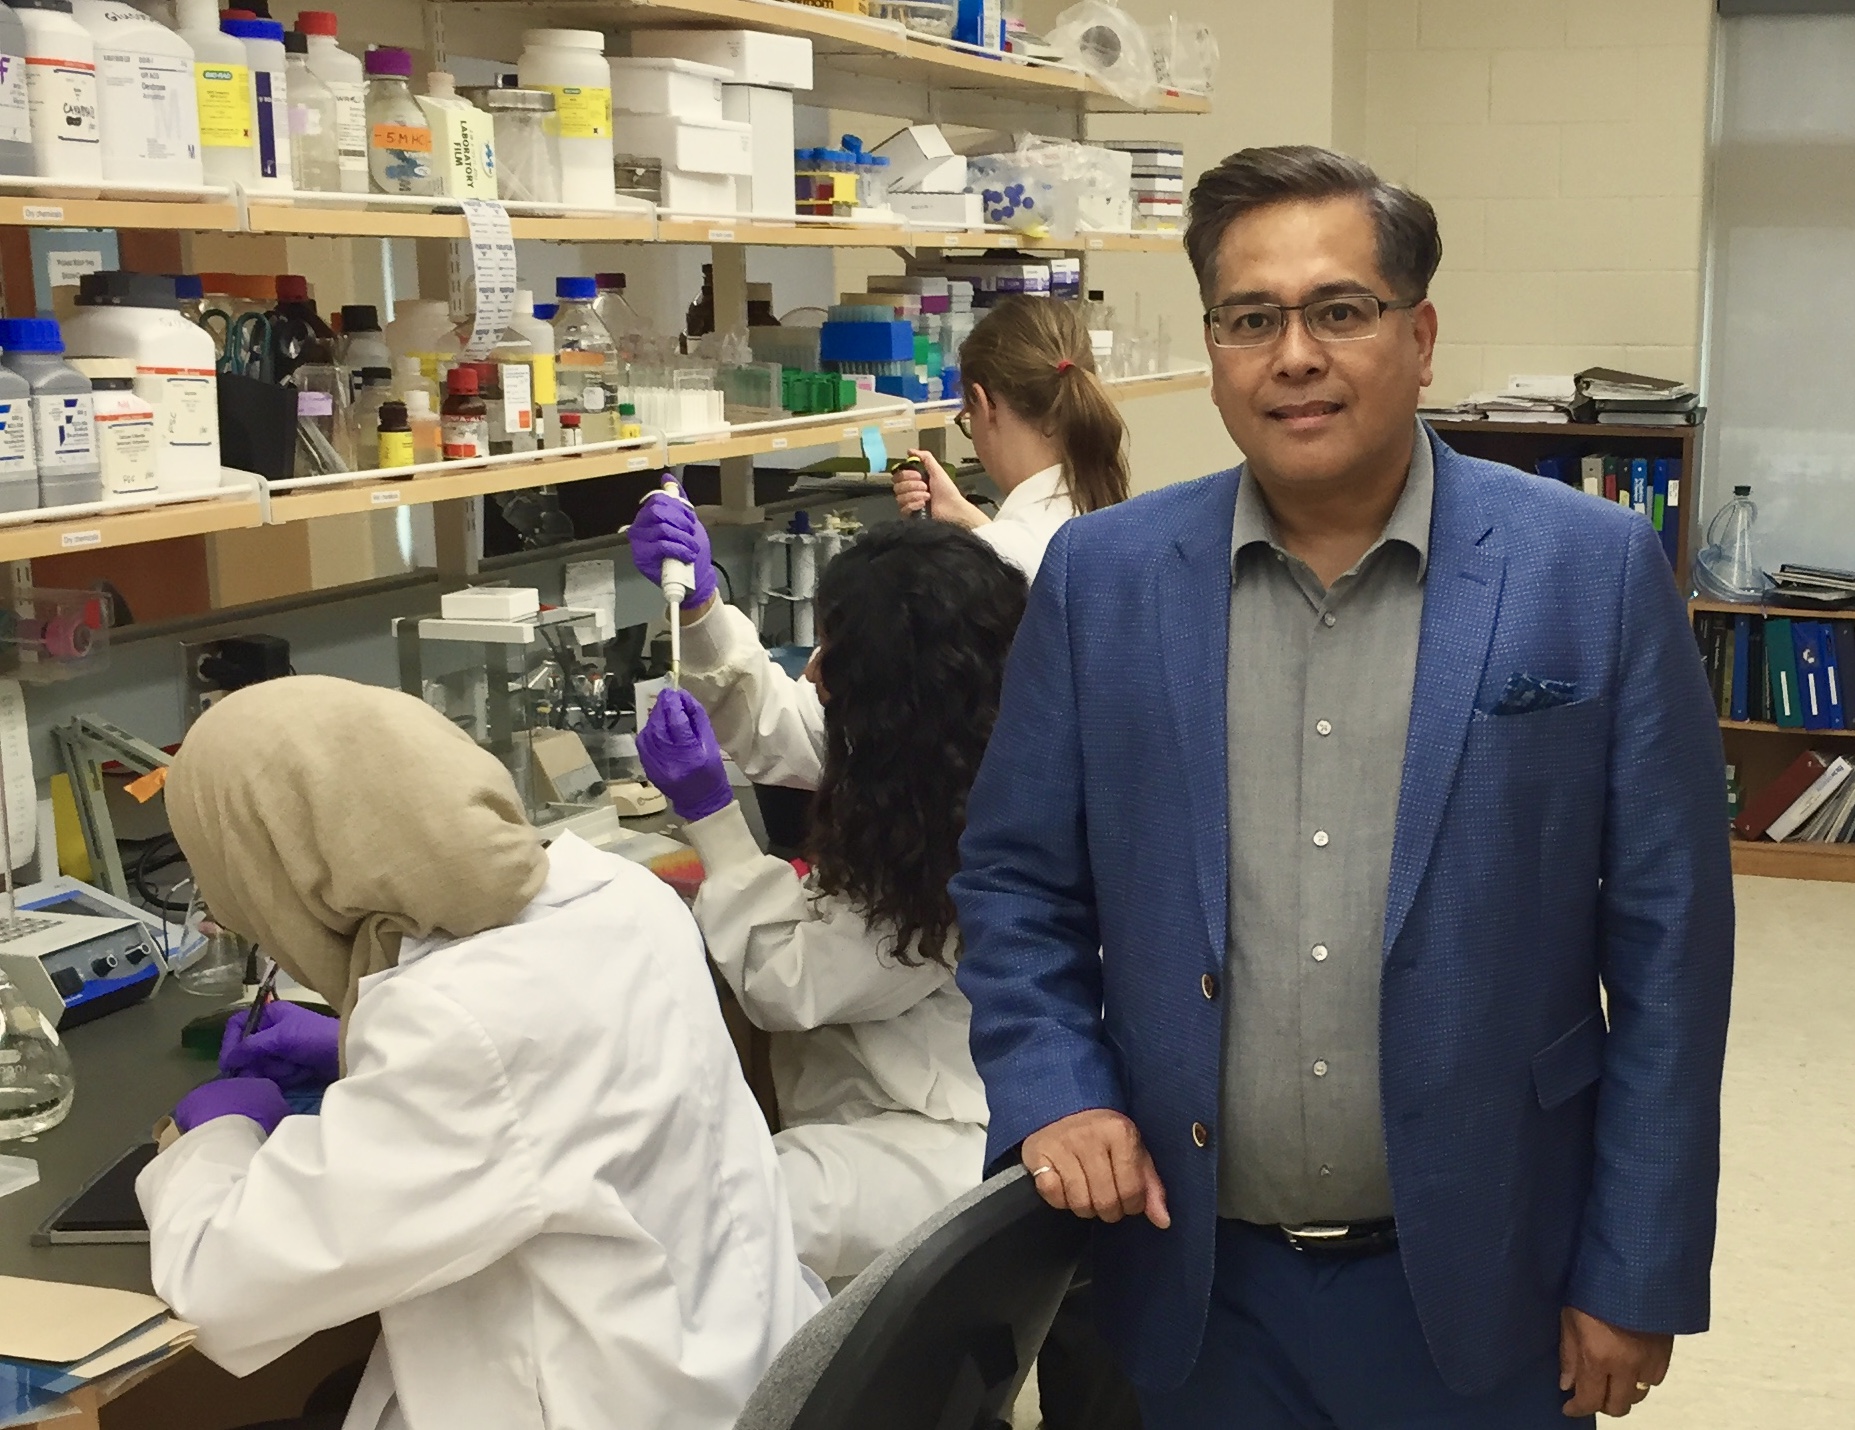 Professor Cayabyab in his laboratory at the University of Saskatchewan. (Photo: Submitted)